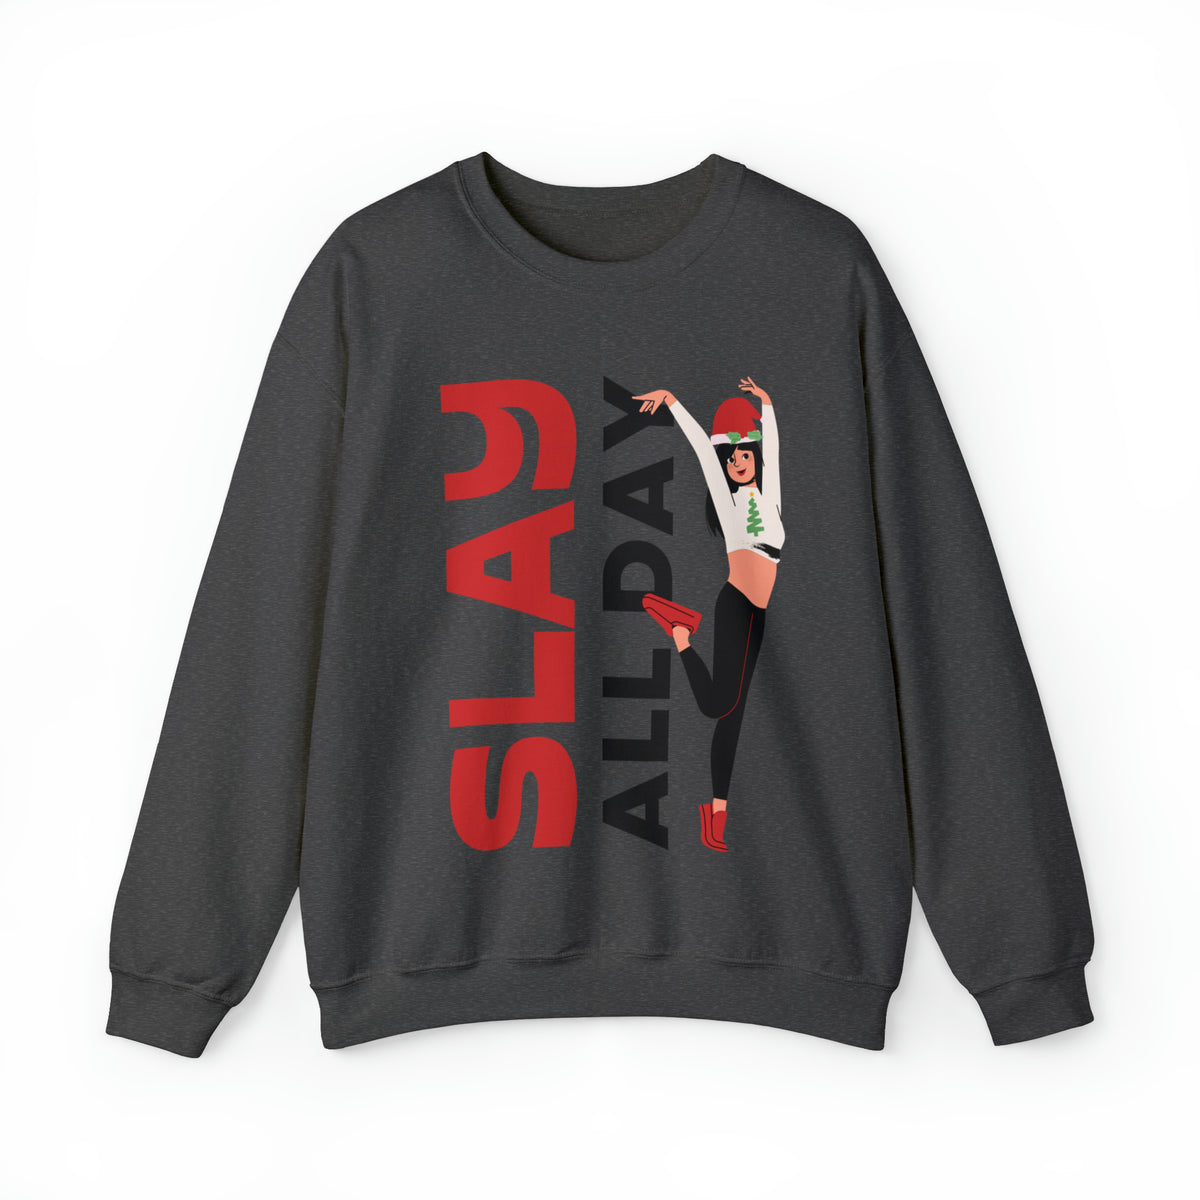 Slay All Day Sweatshirt, Sleigh All Day Sweater, Trendy Sweater For Christmas, Christmas Gifts For Her, Retro Crewneck, Cute Holiday Sweater